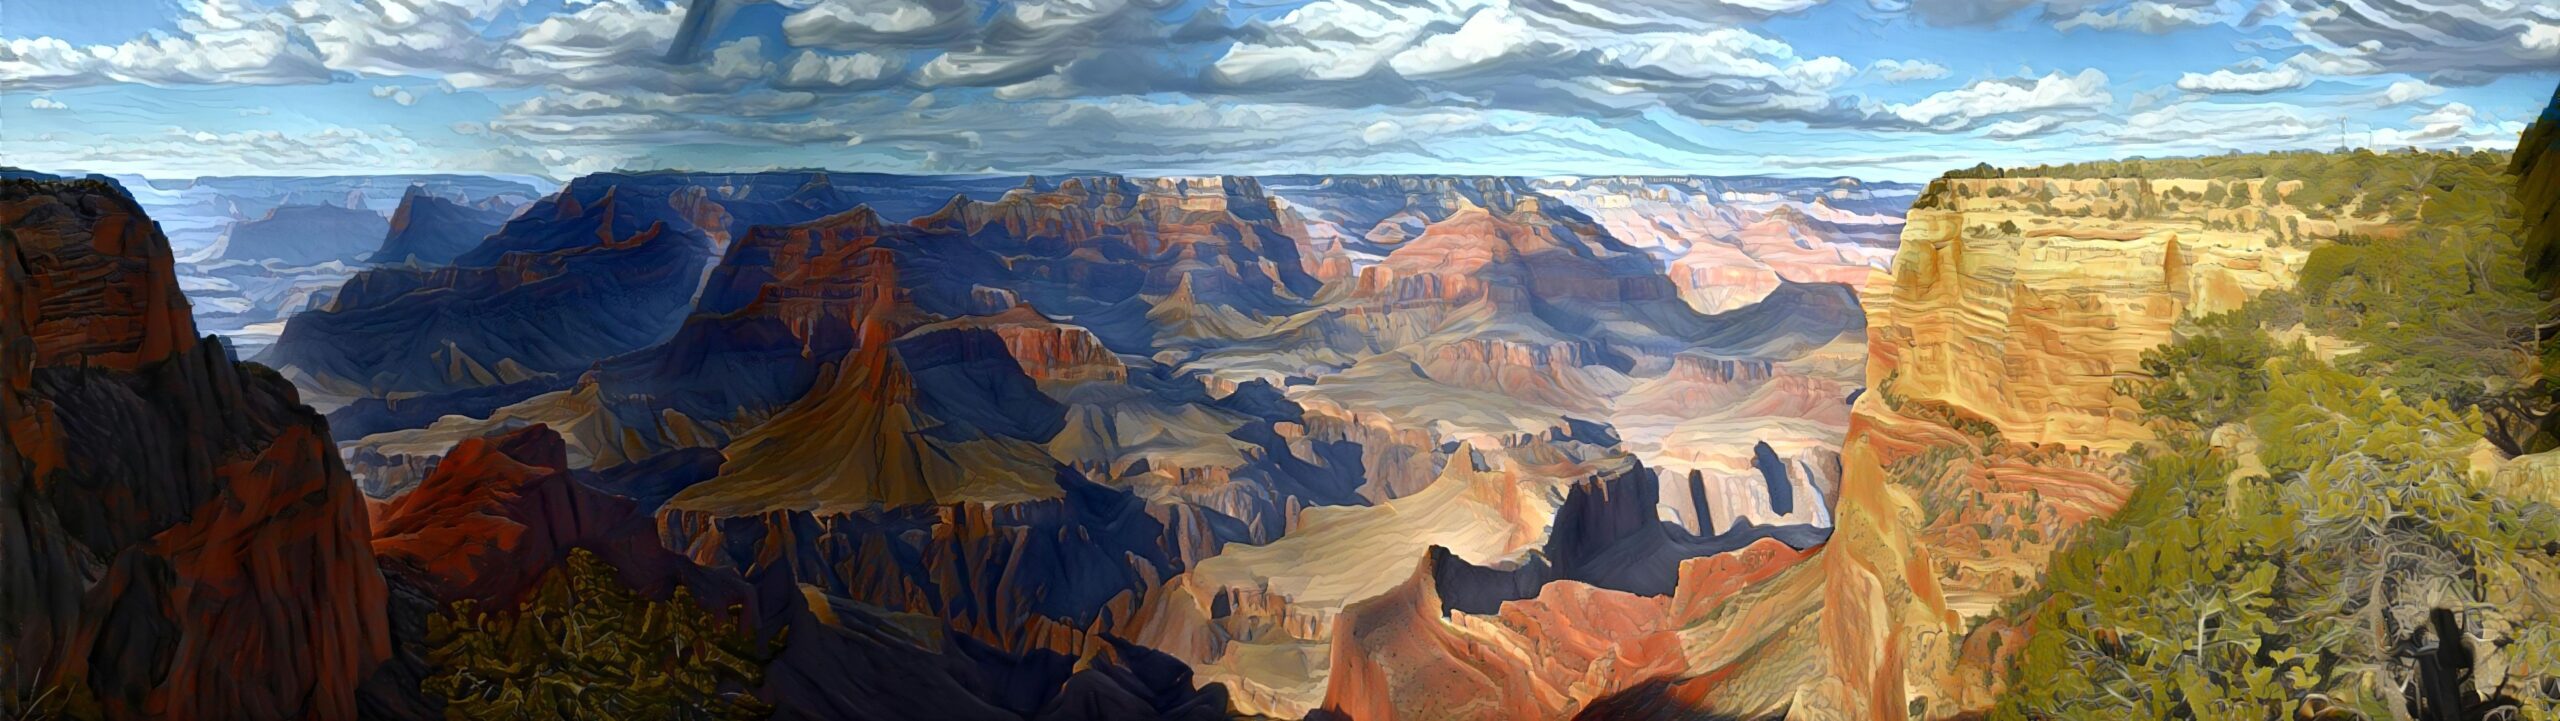 Grand Canyon Painting (5120X1440)